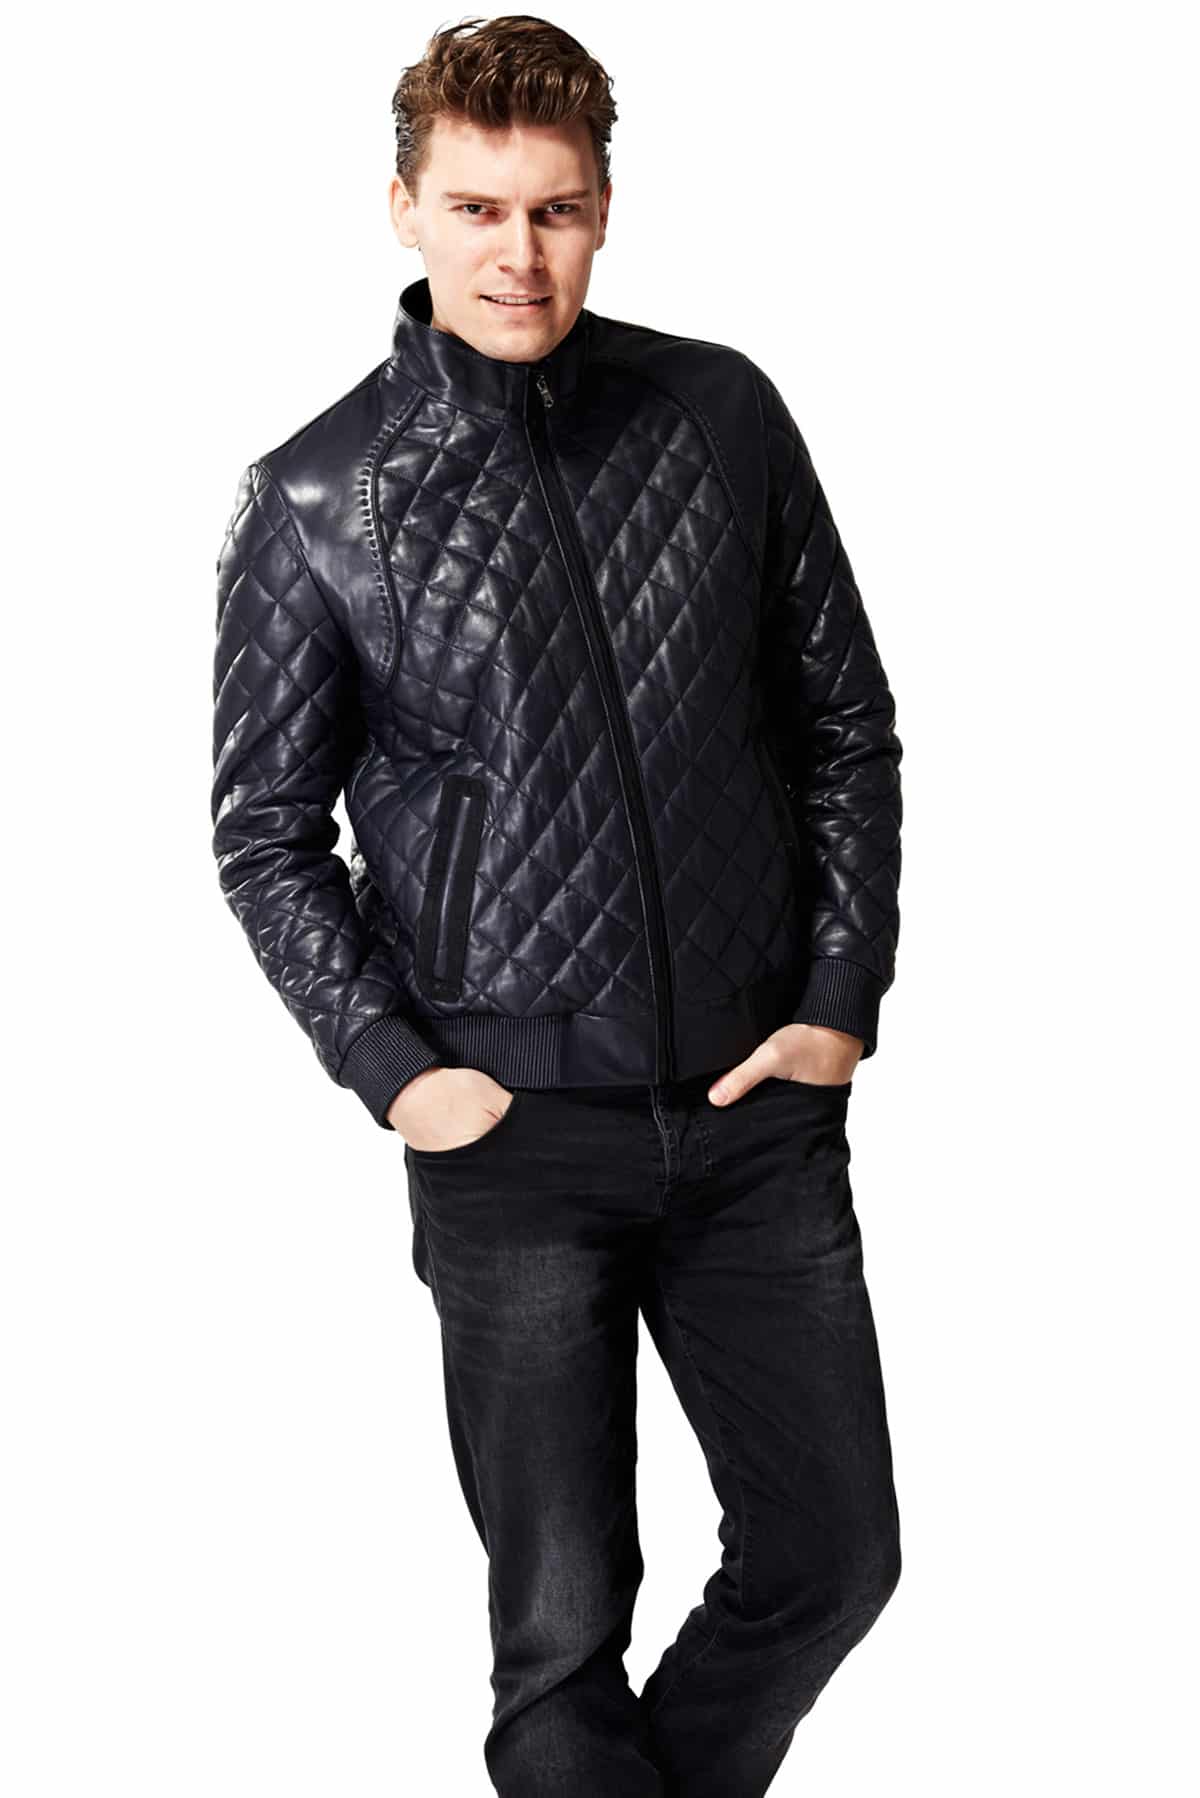 Diamond Quilted Leather Jacket | vlr.eng.br